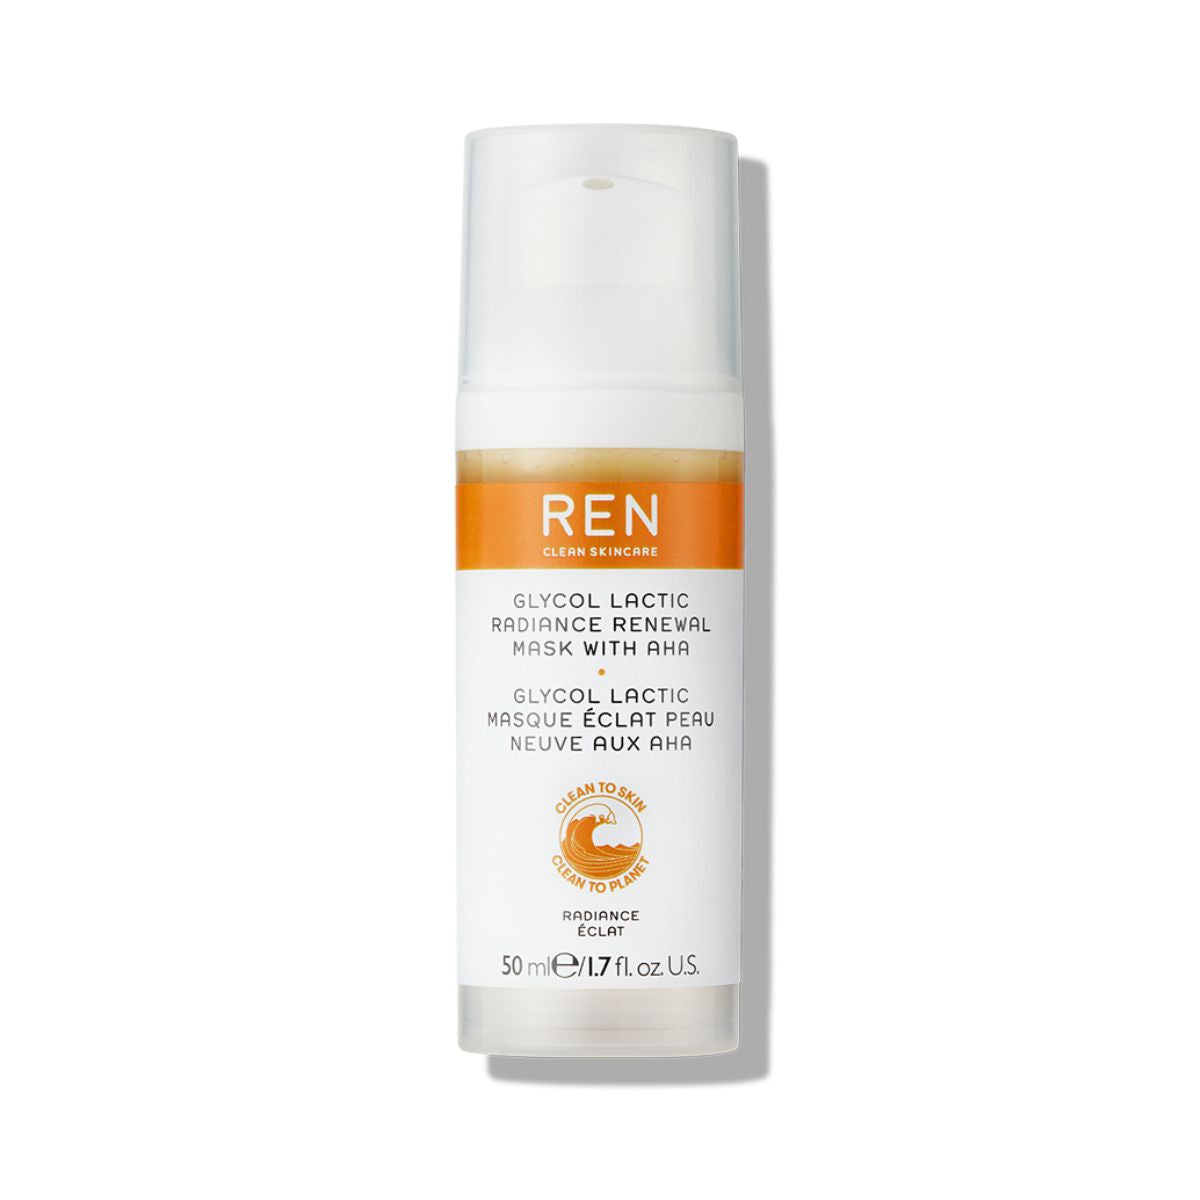 REN Glycol Lactic Radiance Renewal Mask with AHA